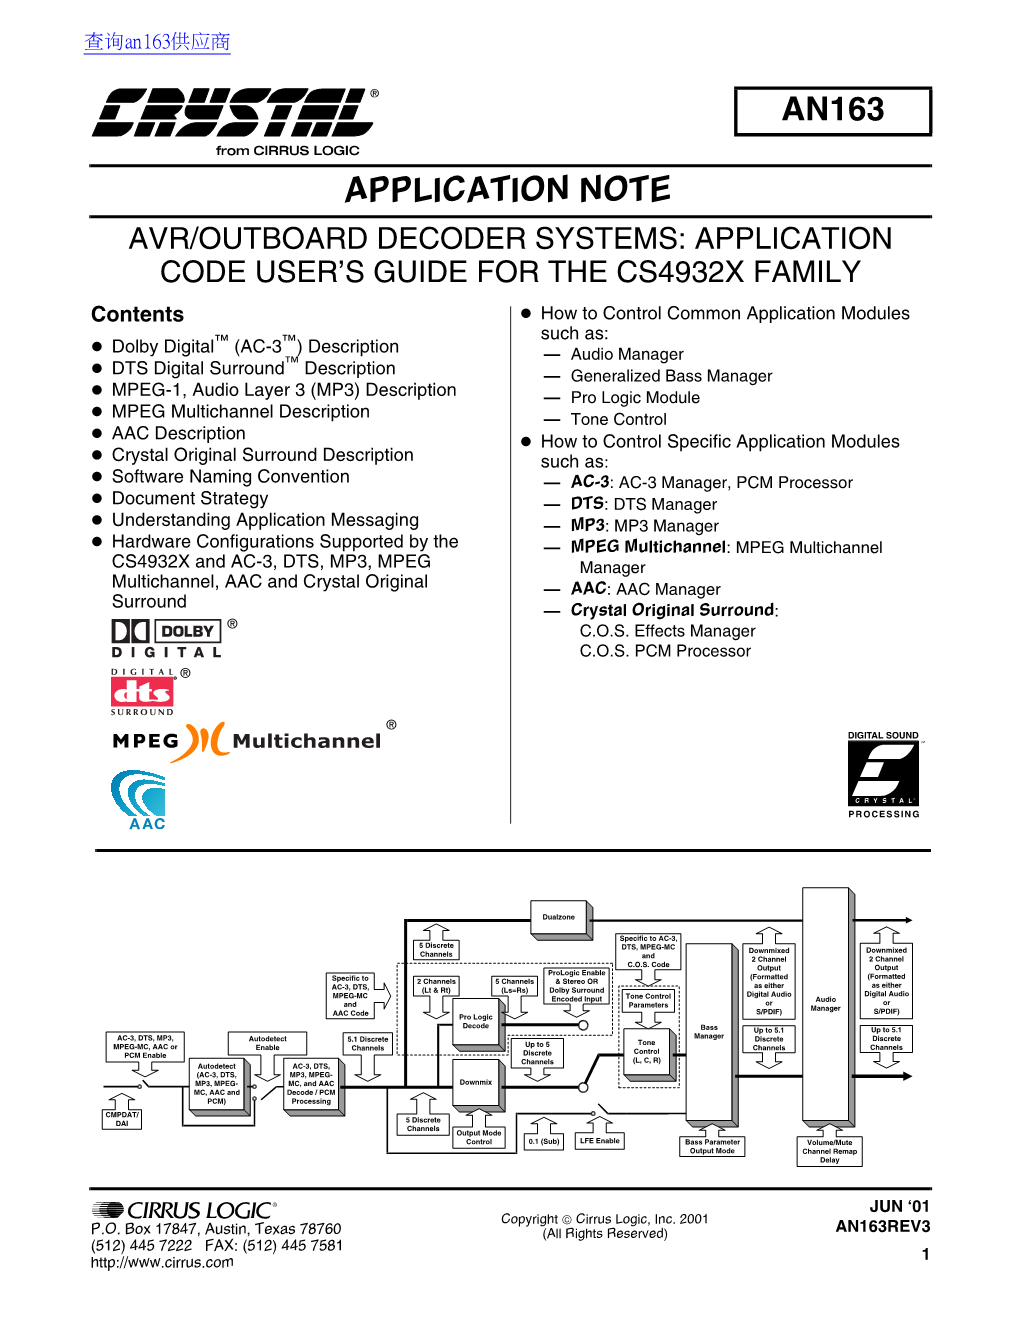 Application Note An163